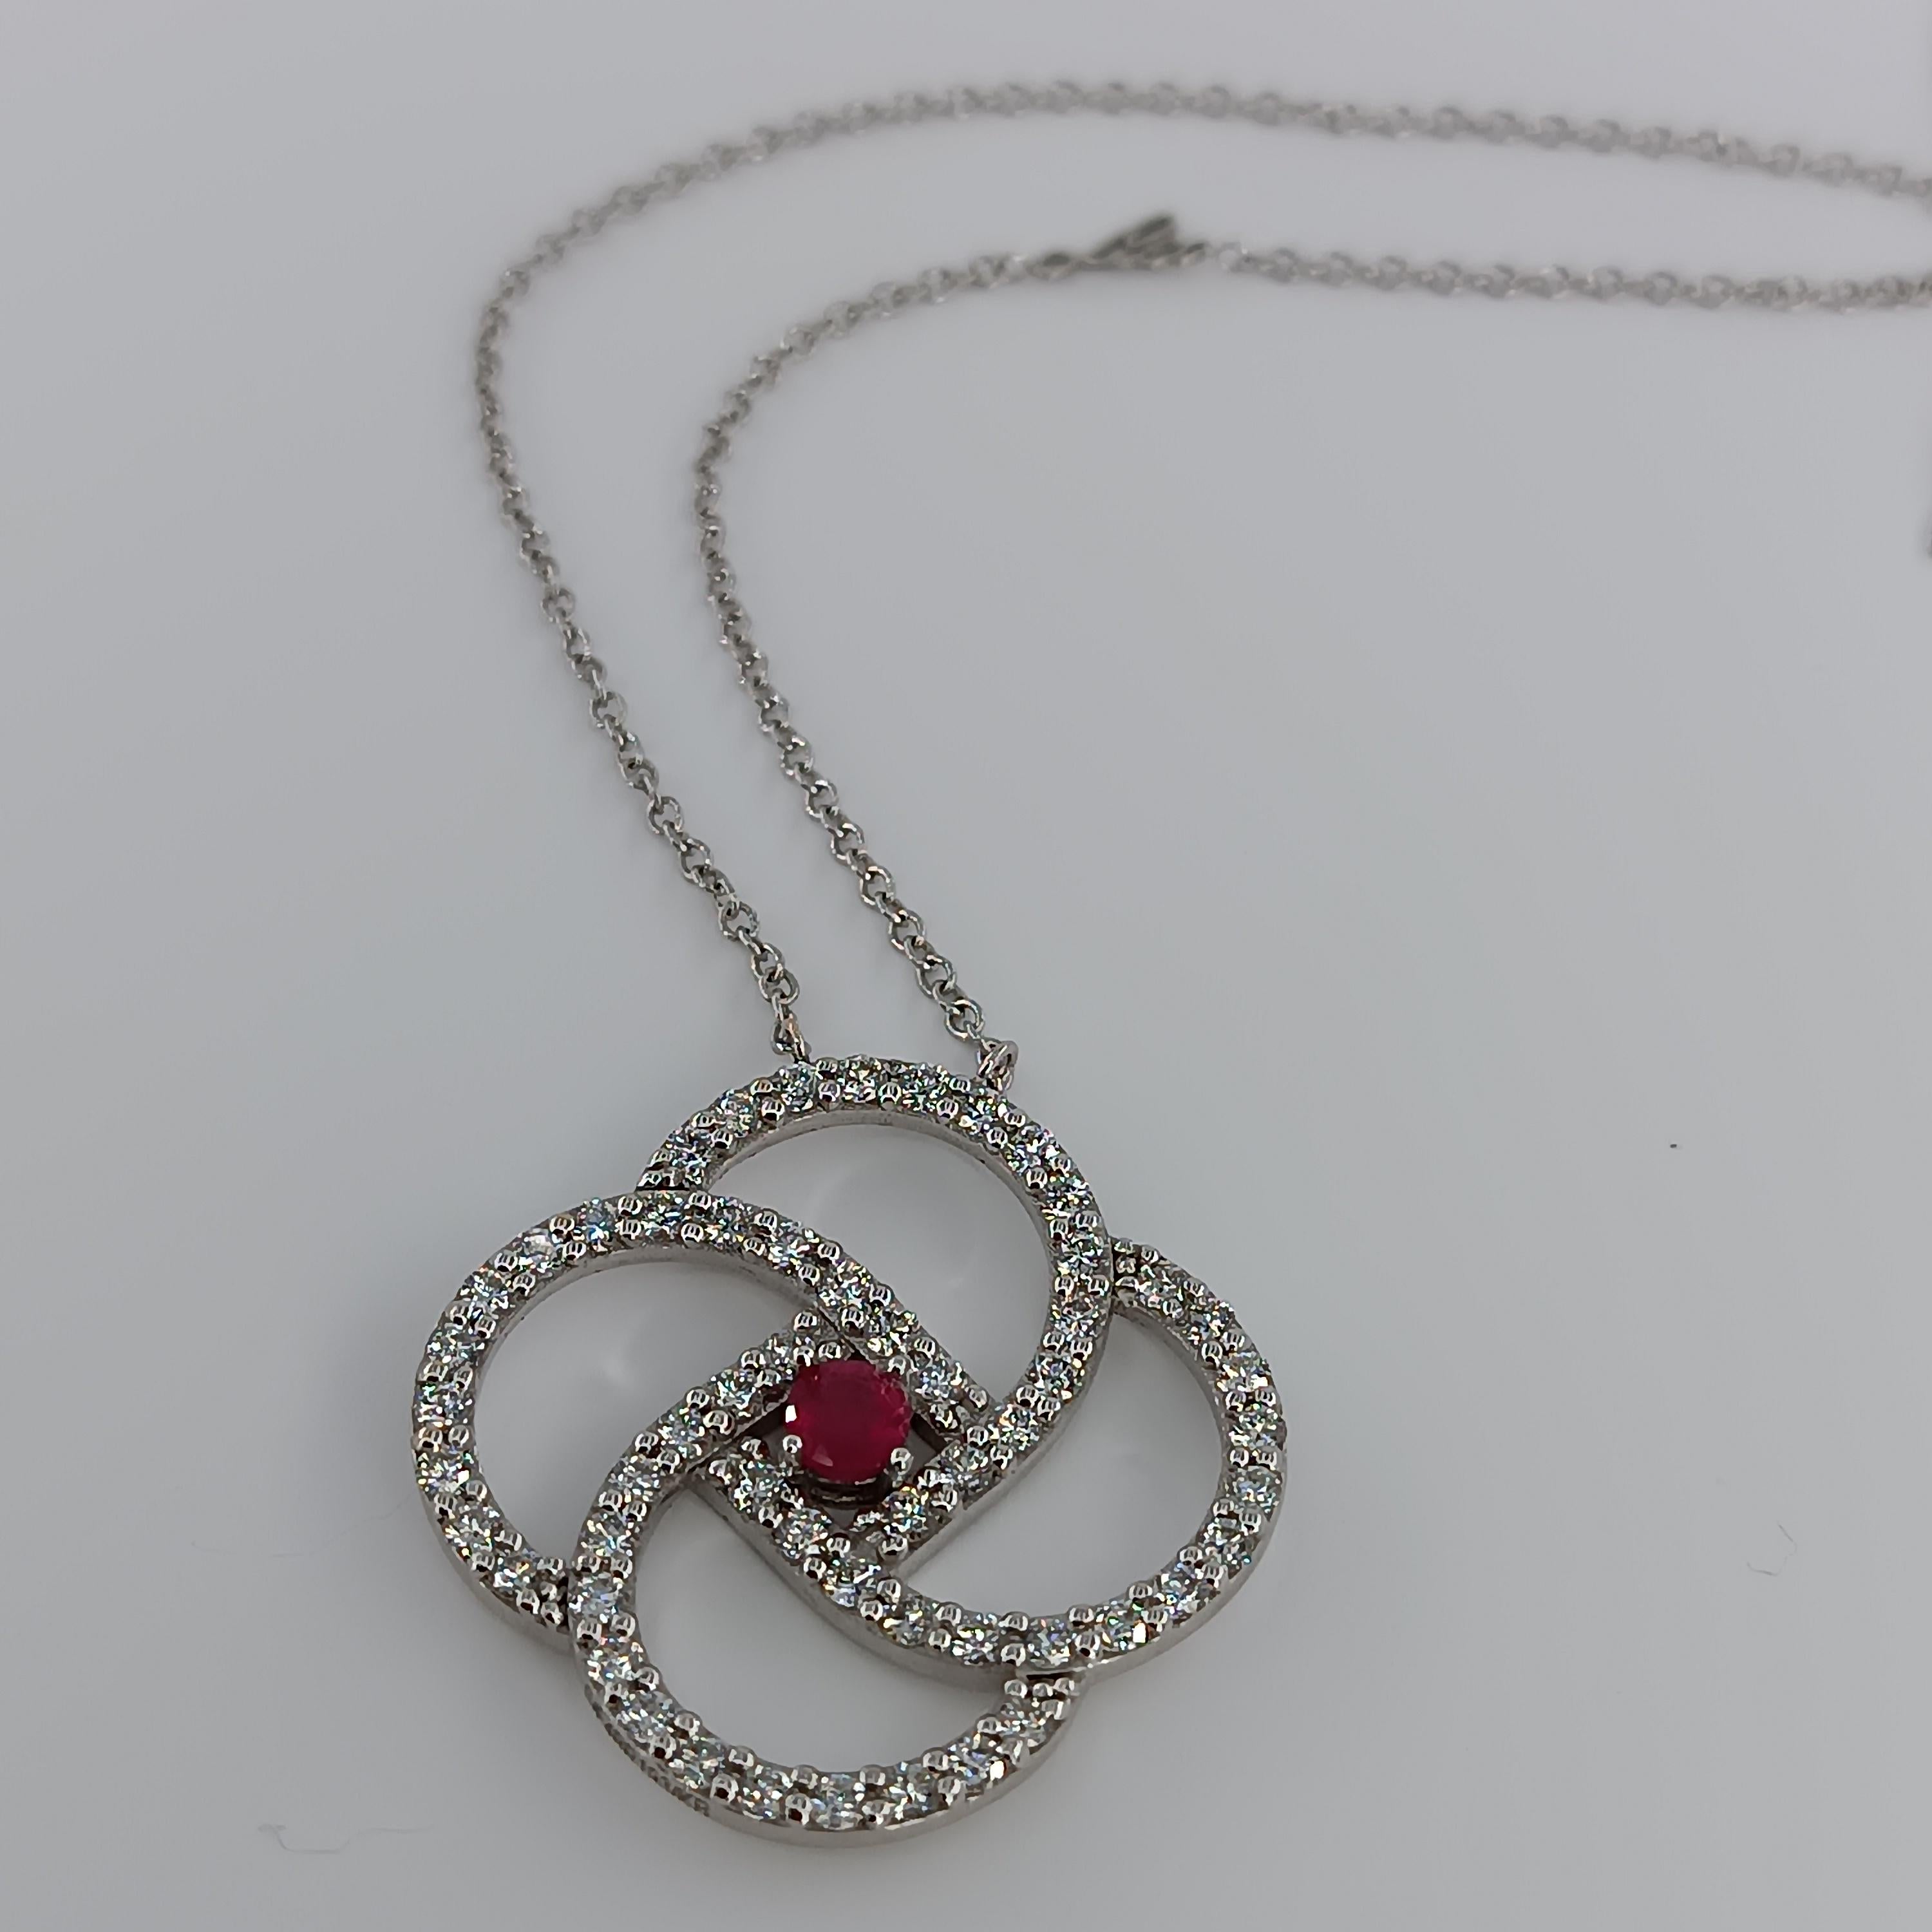 This beautiful pendant made of 18 carat White gold for 9.42 grams boasts a central ruby of 0.55 carat and 56 VS G color diamonds for a total of 1.68 carats. 
any item of our jewelry collection has a dedicated identification number lasered on the